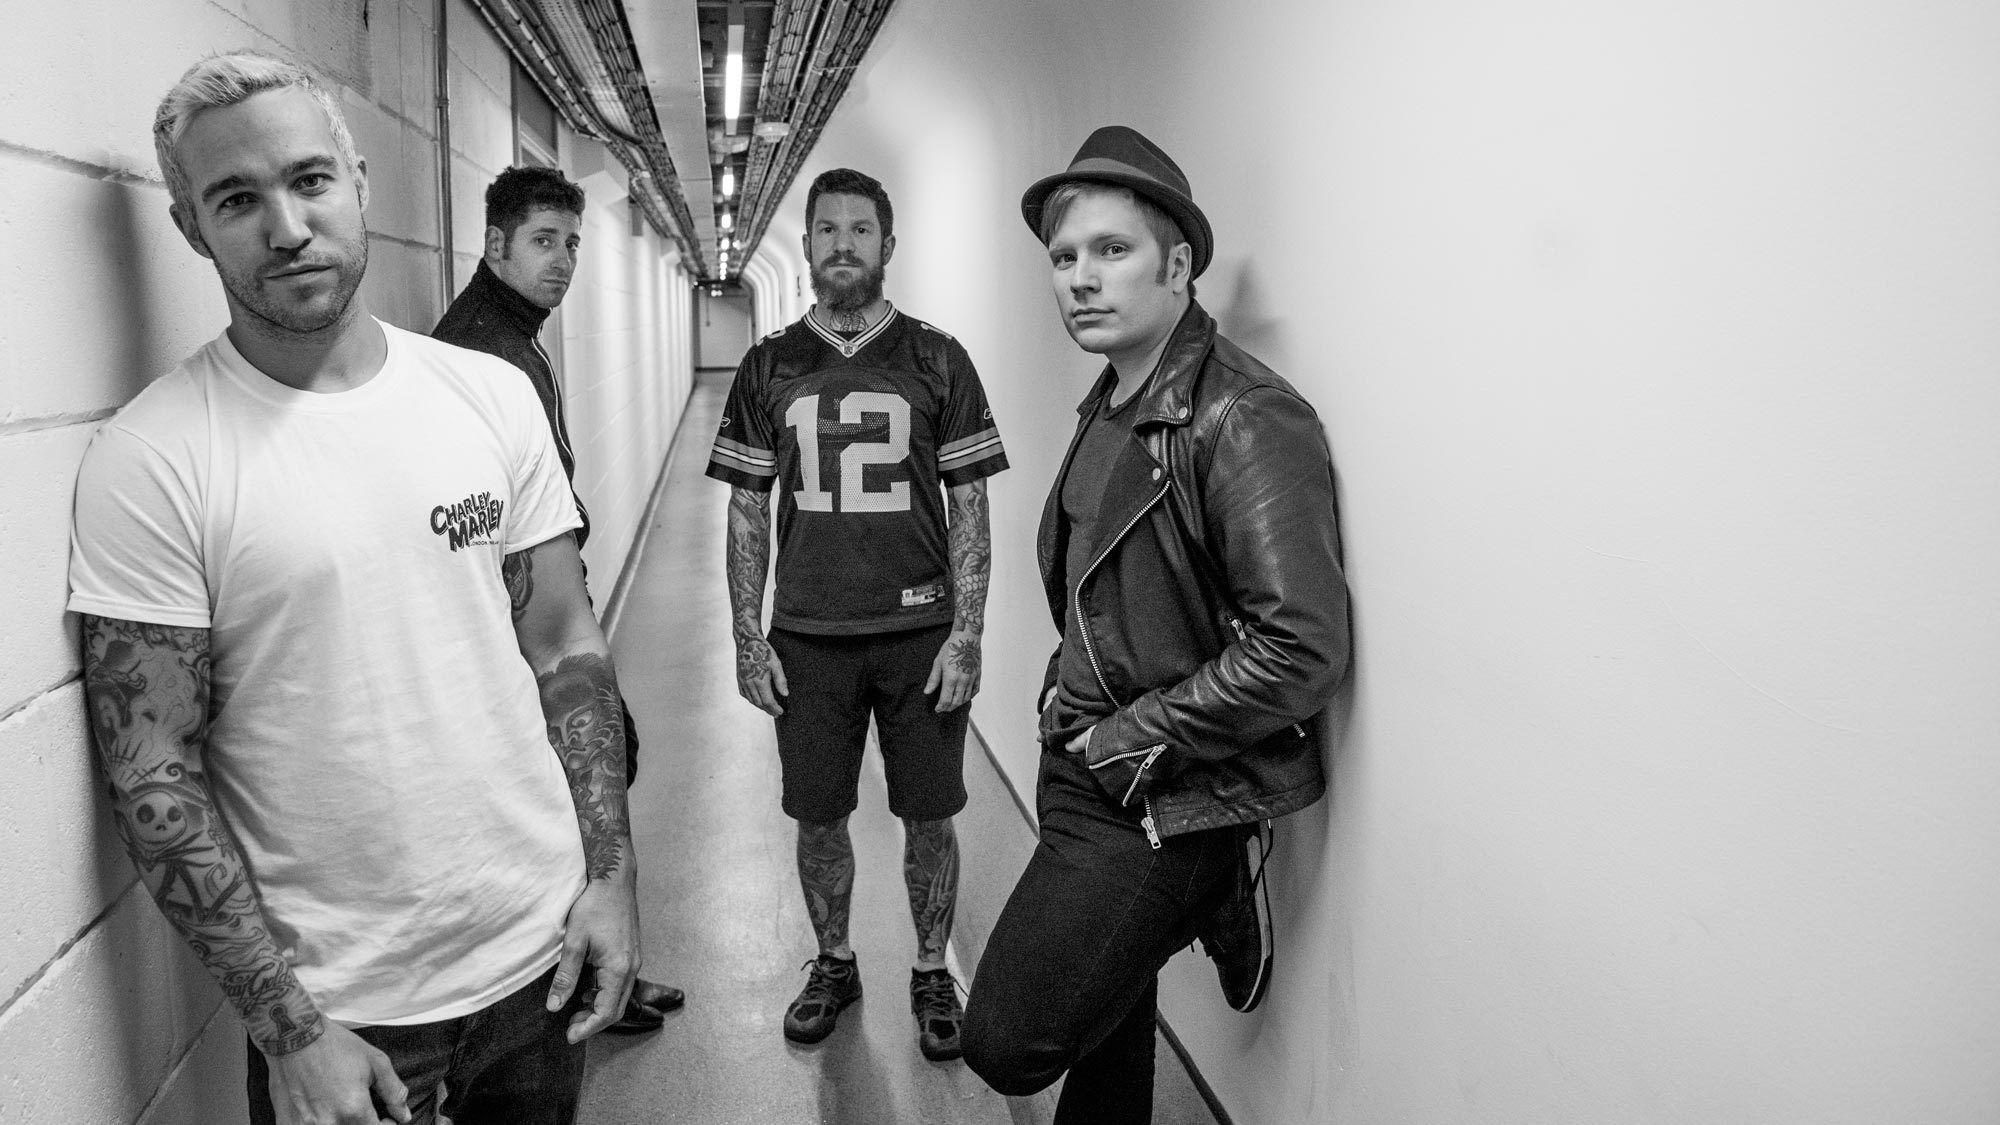 Fall Out Boy Background Wallpaper 2000Ã—1125. Favourite people